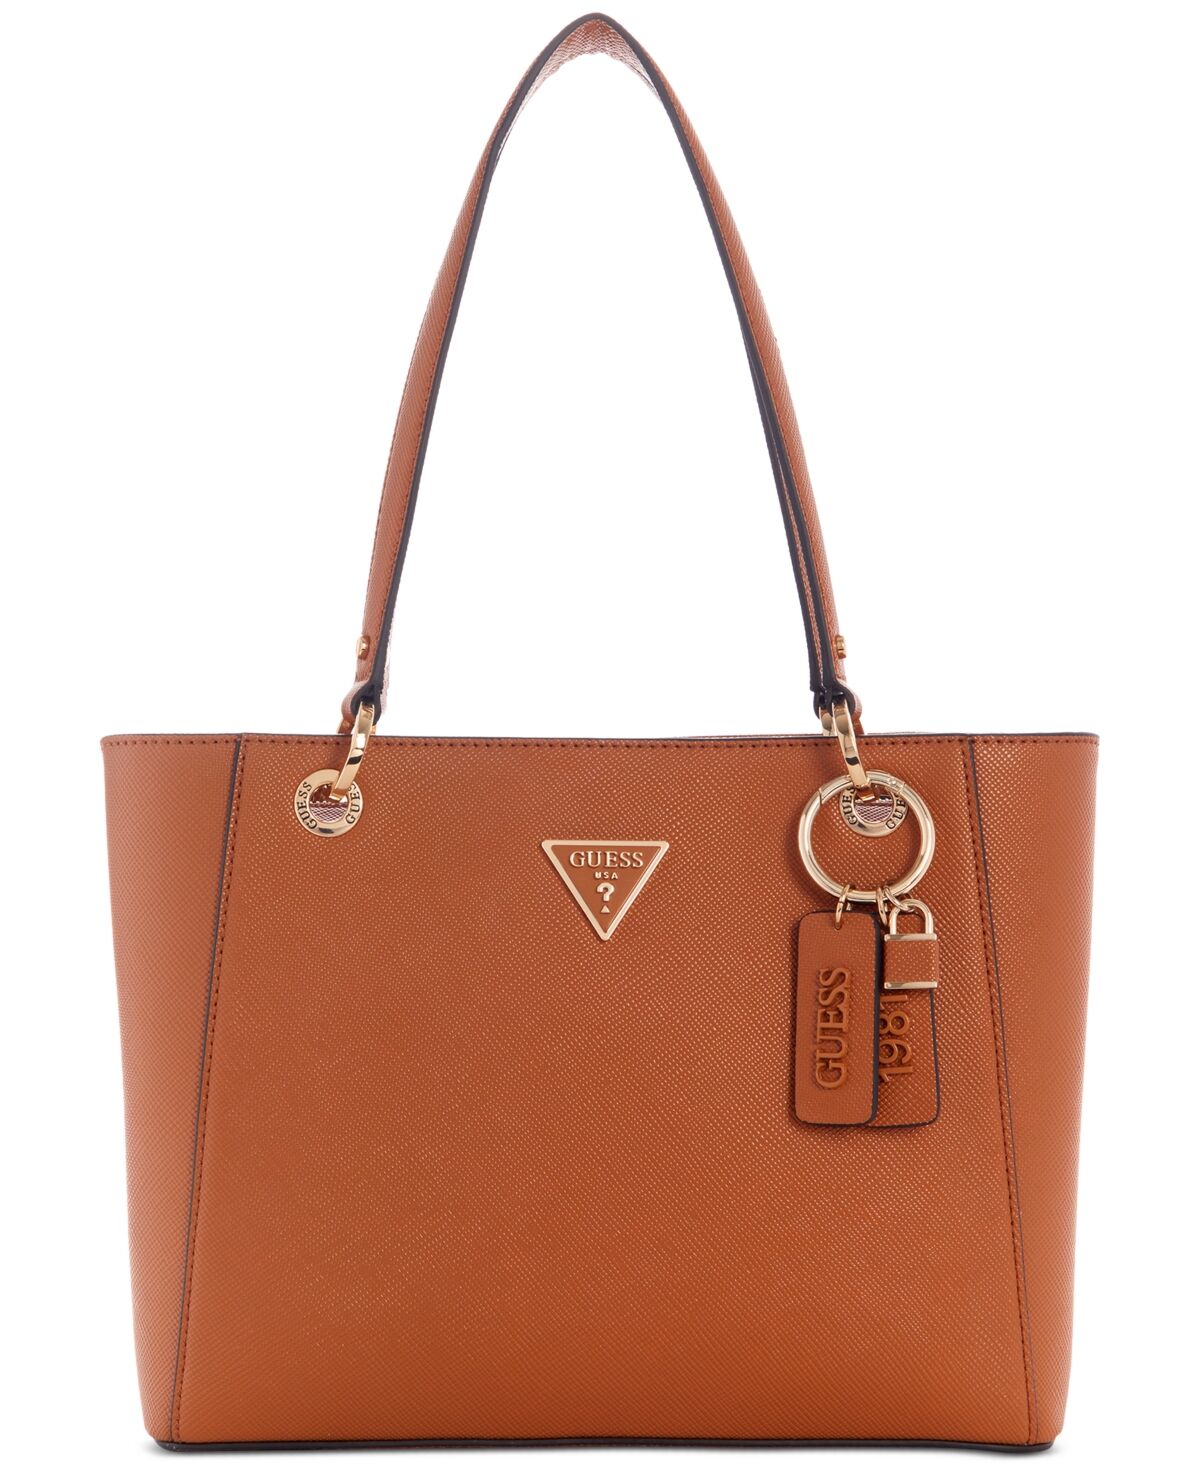 Guess Noelle Small Double Compartment Top Zip Tote Bag - Light Cognac